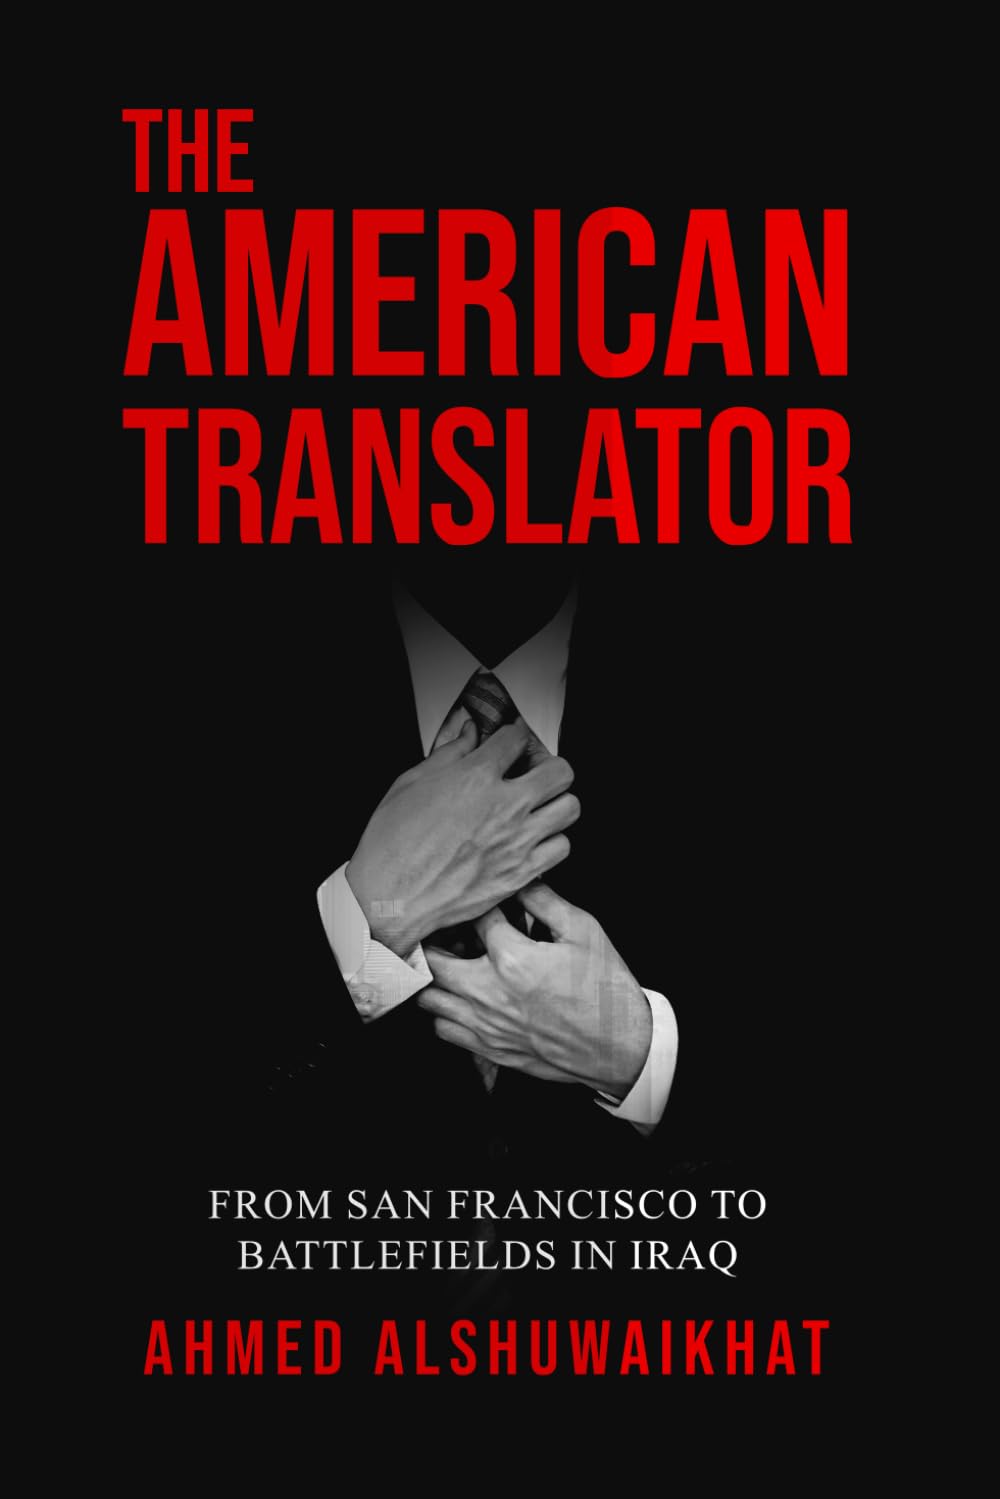 "The American Translator" by Ahmed Mahdi Alshuwaikhat Promises a Riveting Tale of Culture, War, and Global Peace